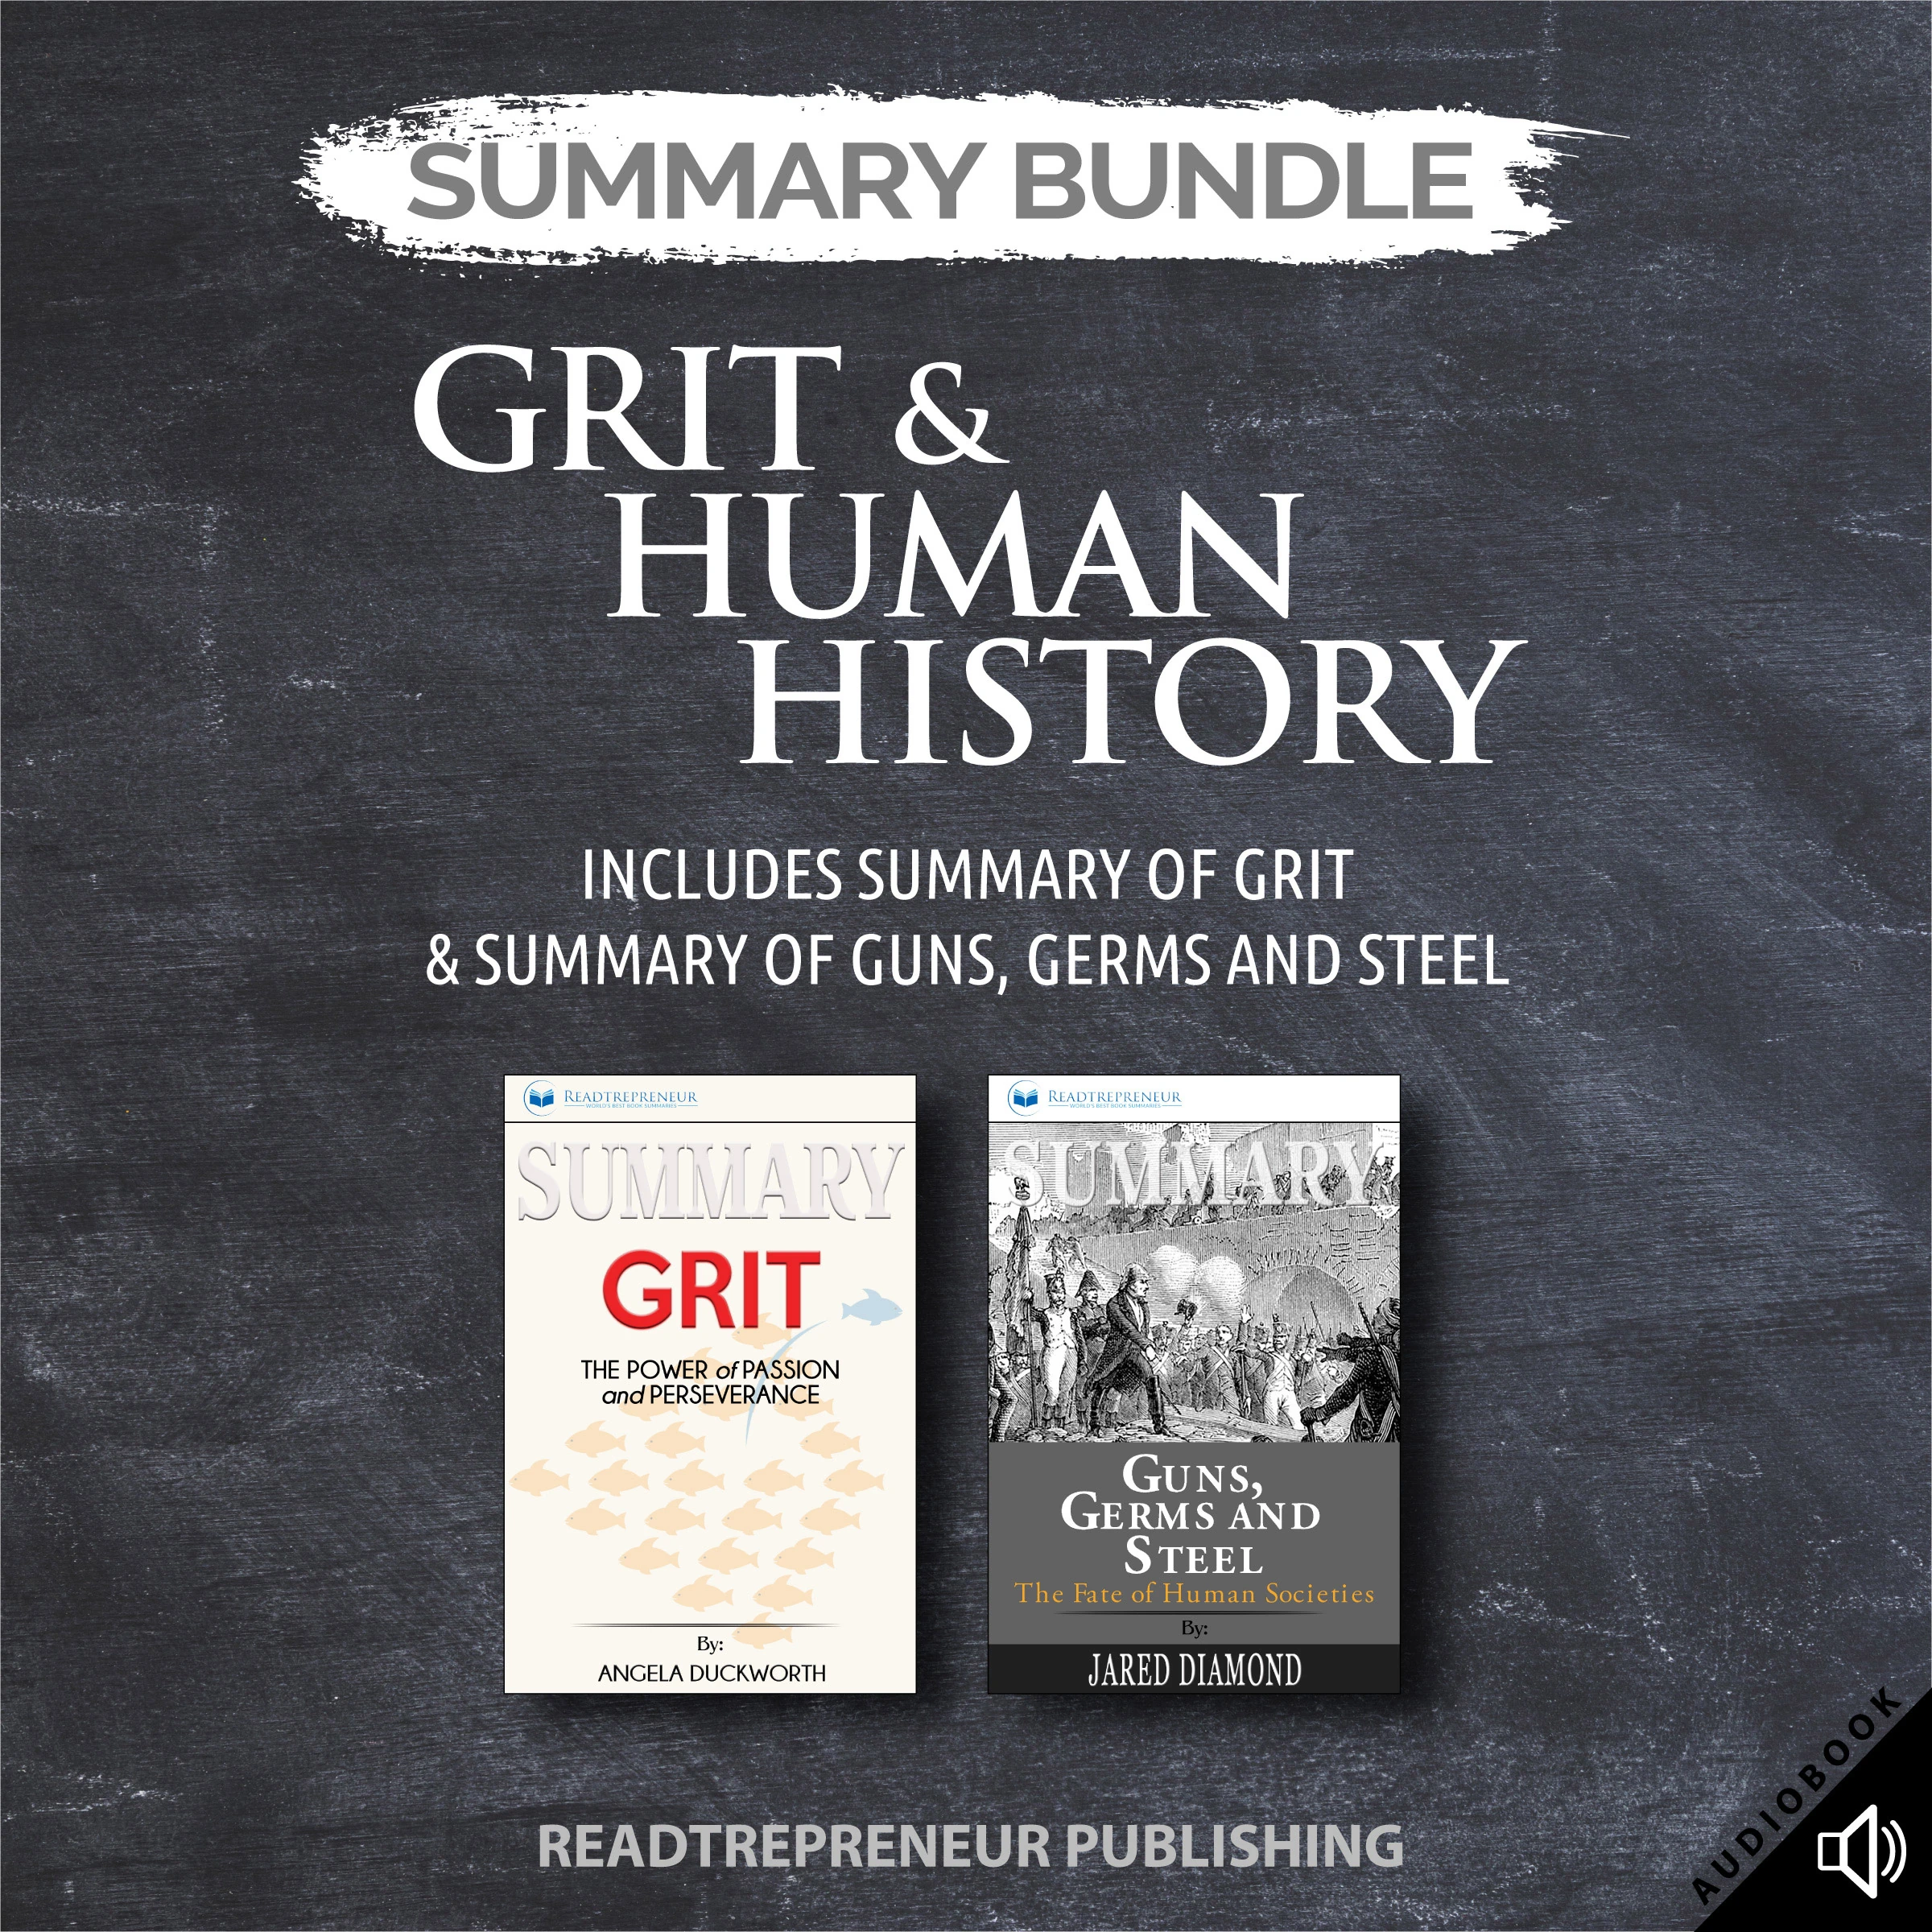 Summary Bundle: Grit & Human History | Readtrepreneur Publishing: Includes Summary of Grit & Summary of Guns, Germs and Steel Audiobook by Readtrepreneur Publishing